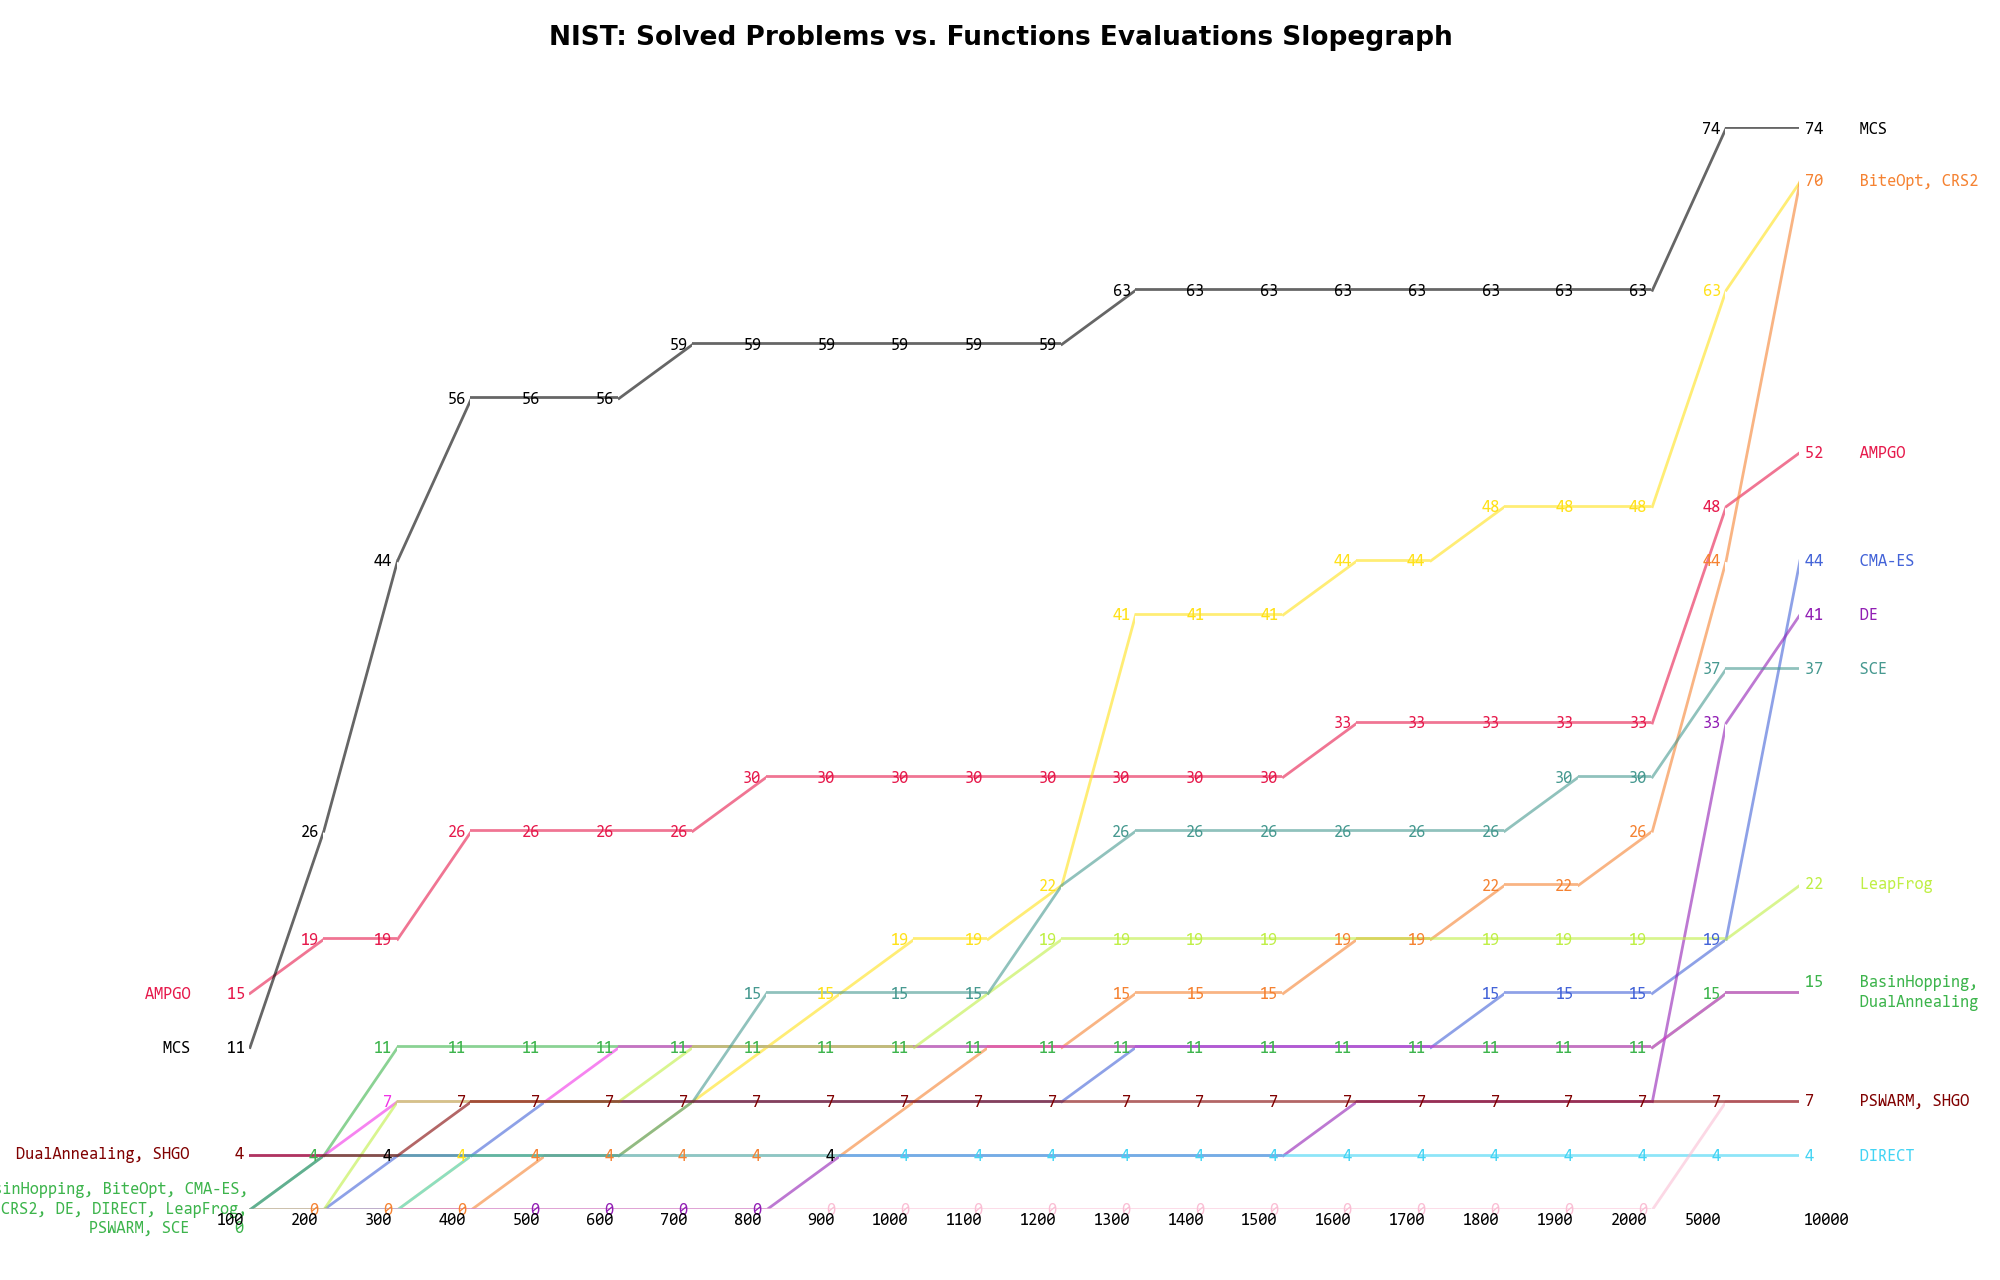 Percentage of problems solved given a fixed number of function evaluations on the NIST test suite